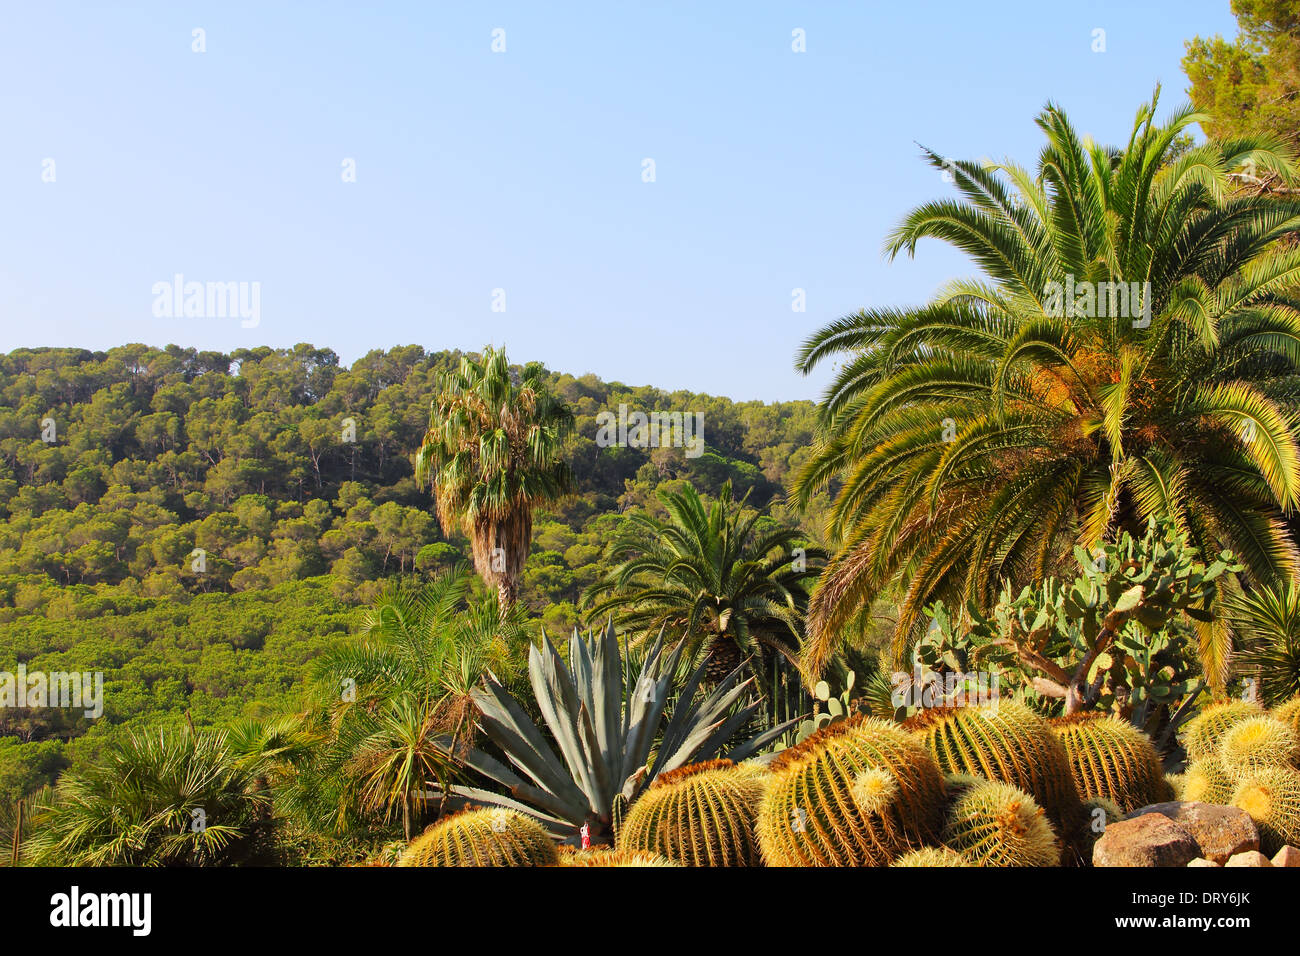 Landscape with cactus in Tenerife, Canary Islands, Spain Stock Photo